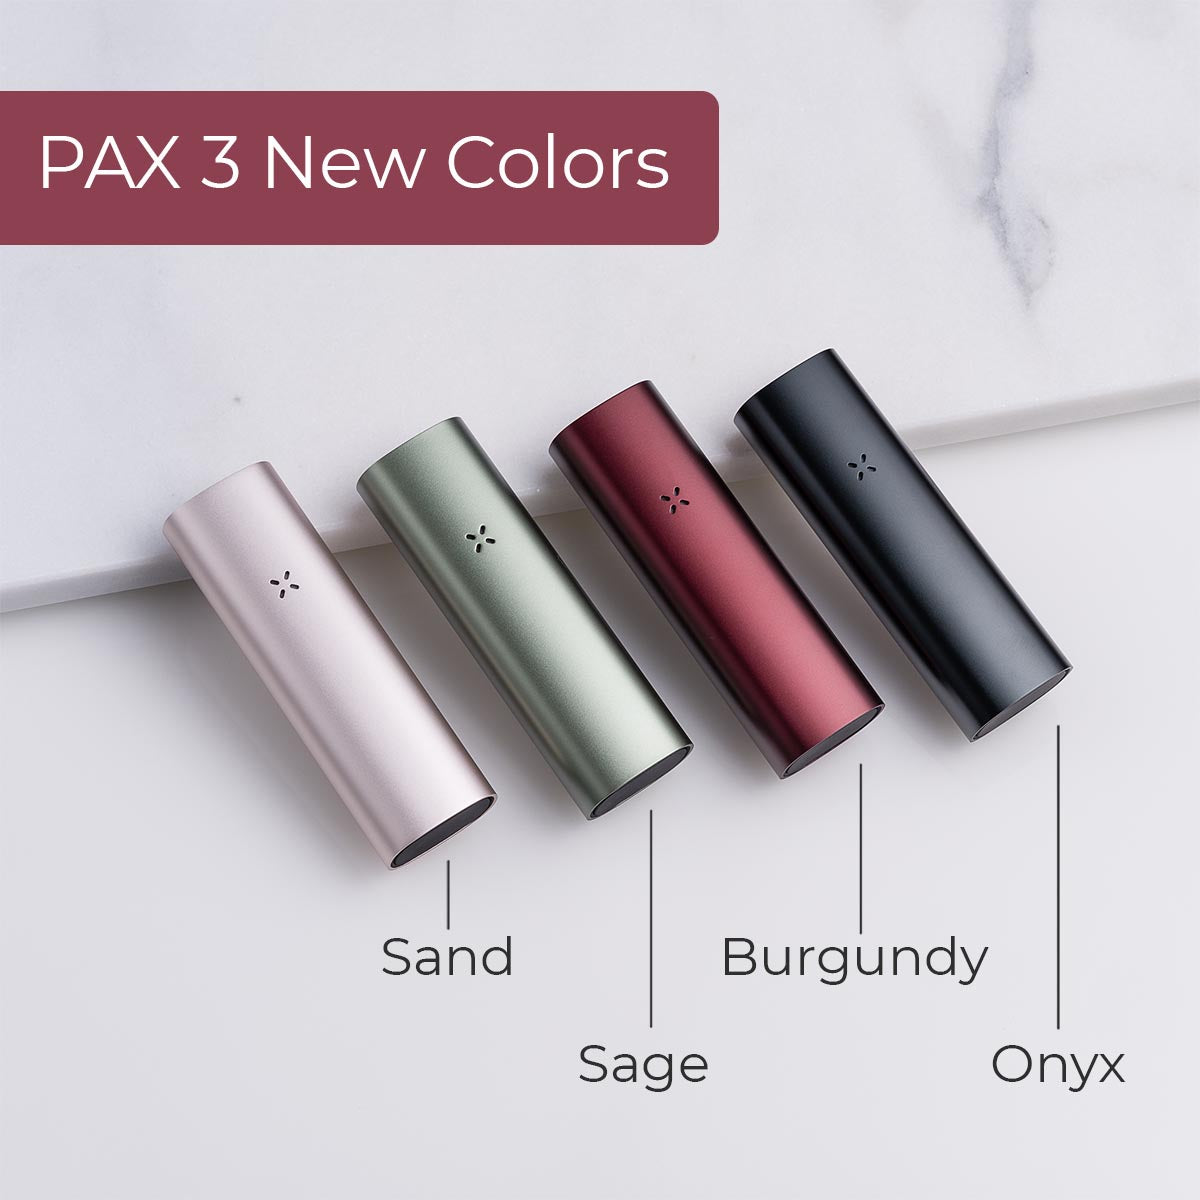 PAX 3 New Colors Sand, Sage, Burgundy and Onyx. 